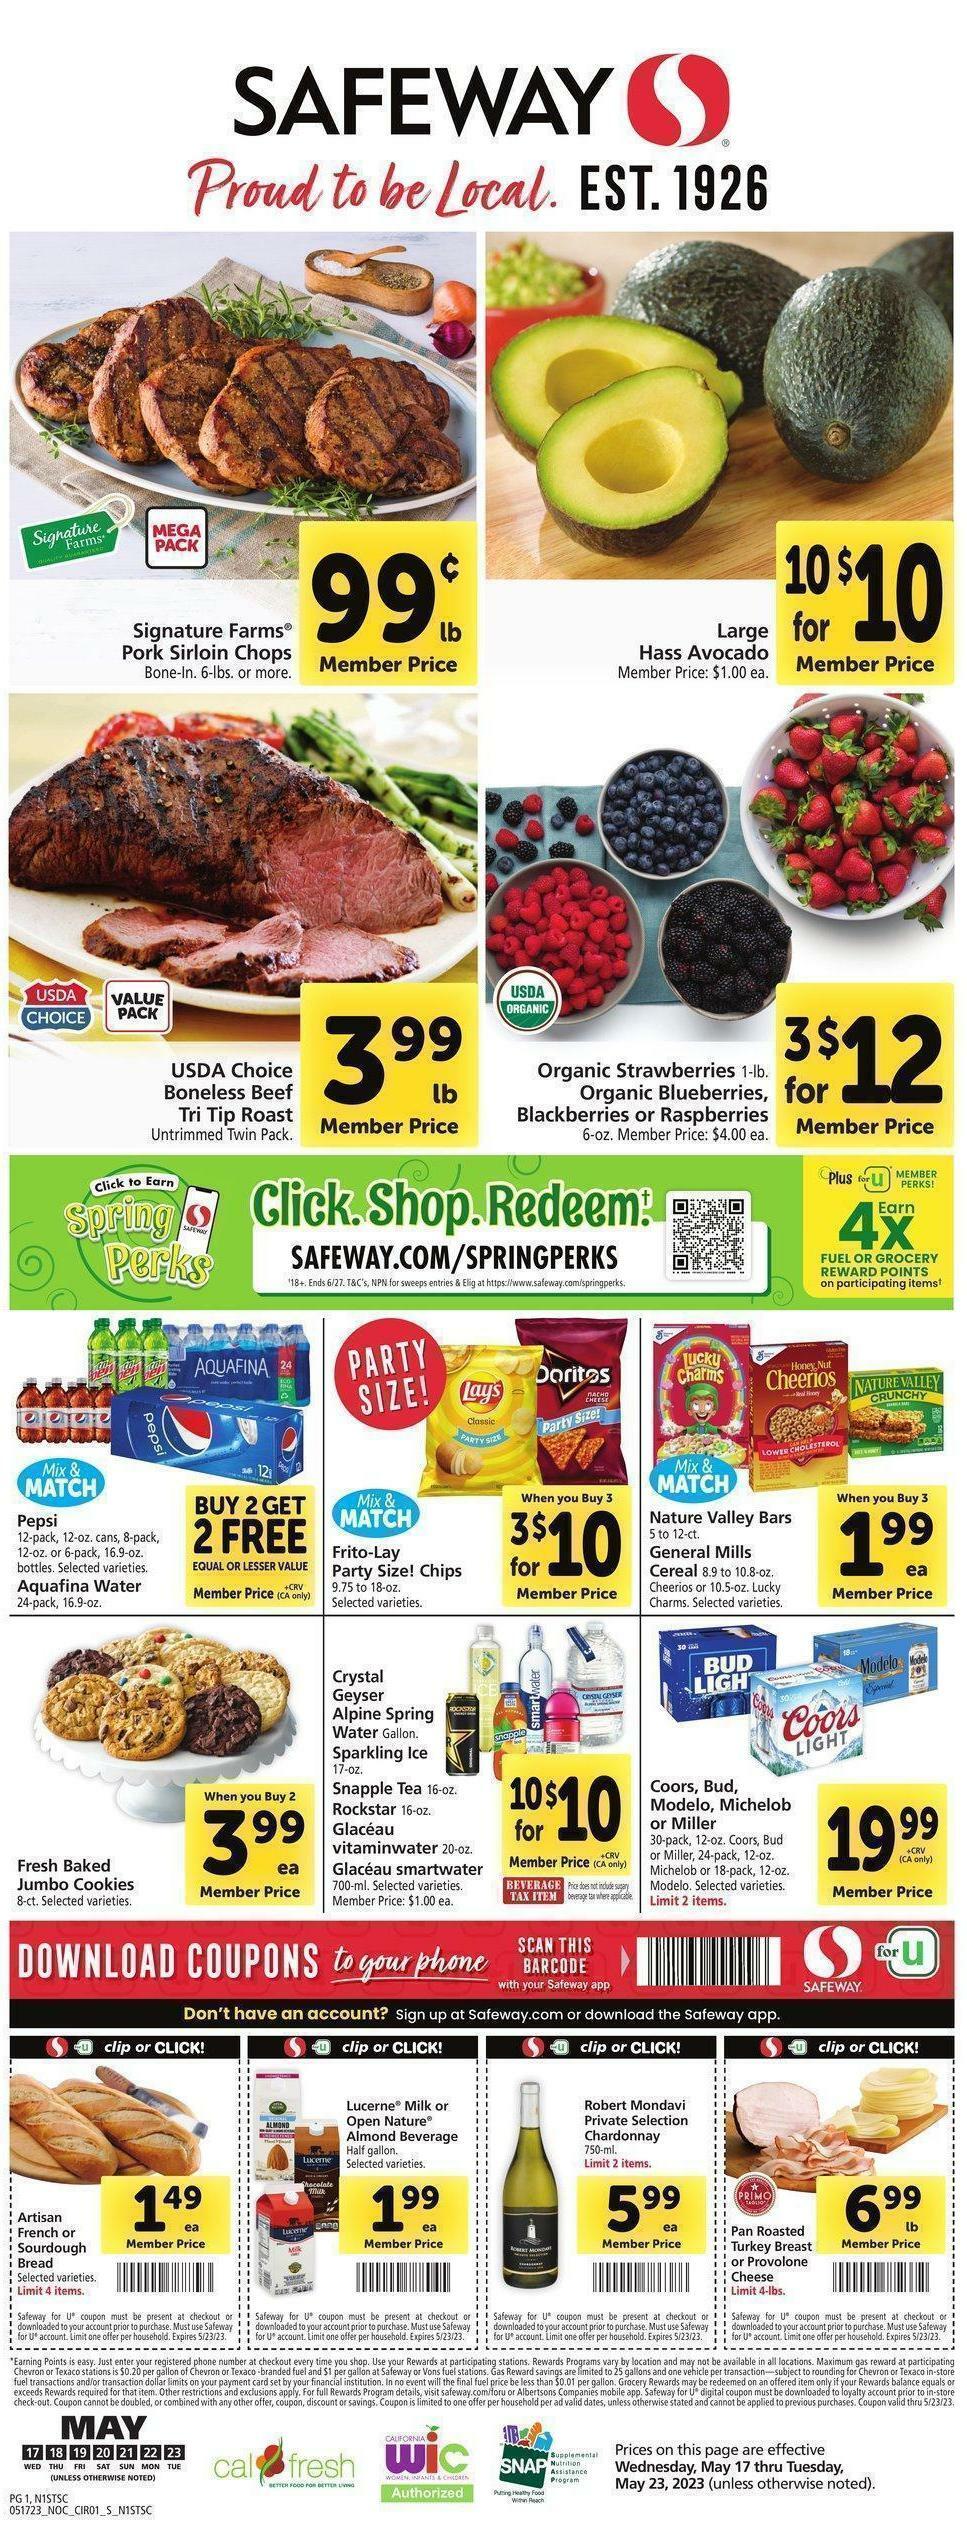 Safeway Weekly Ad from May 17